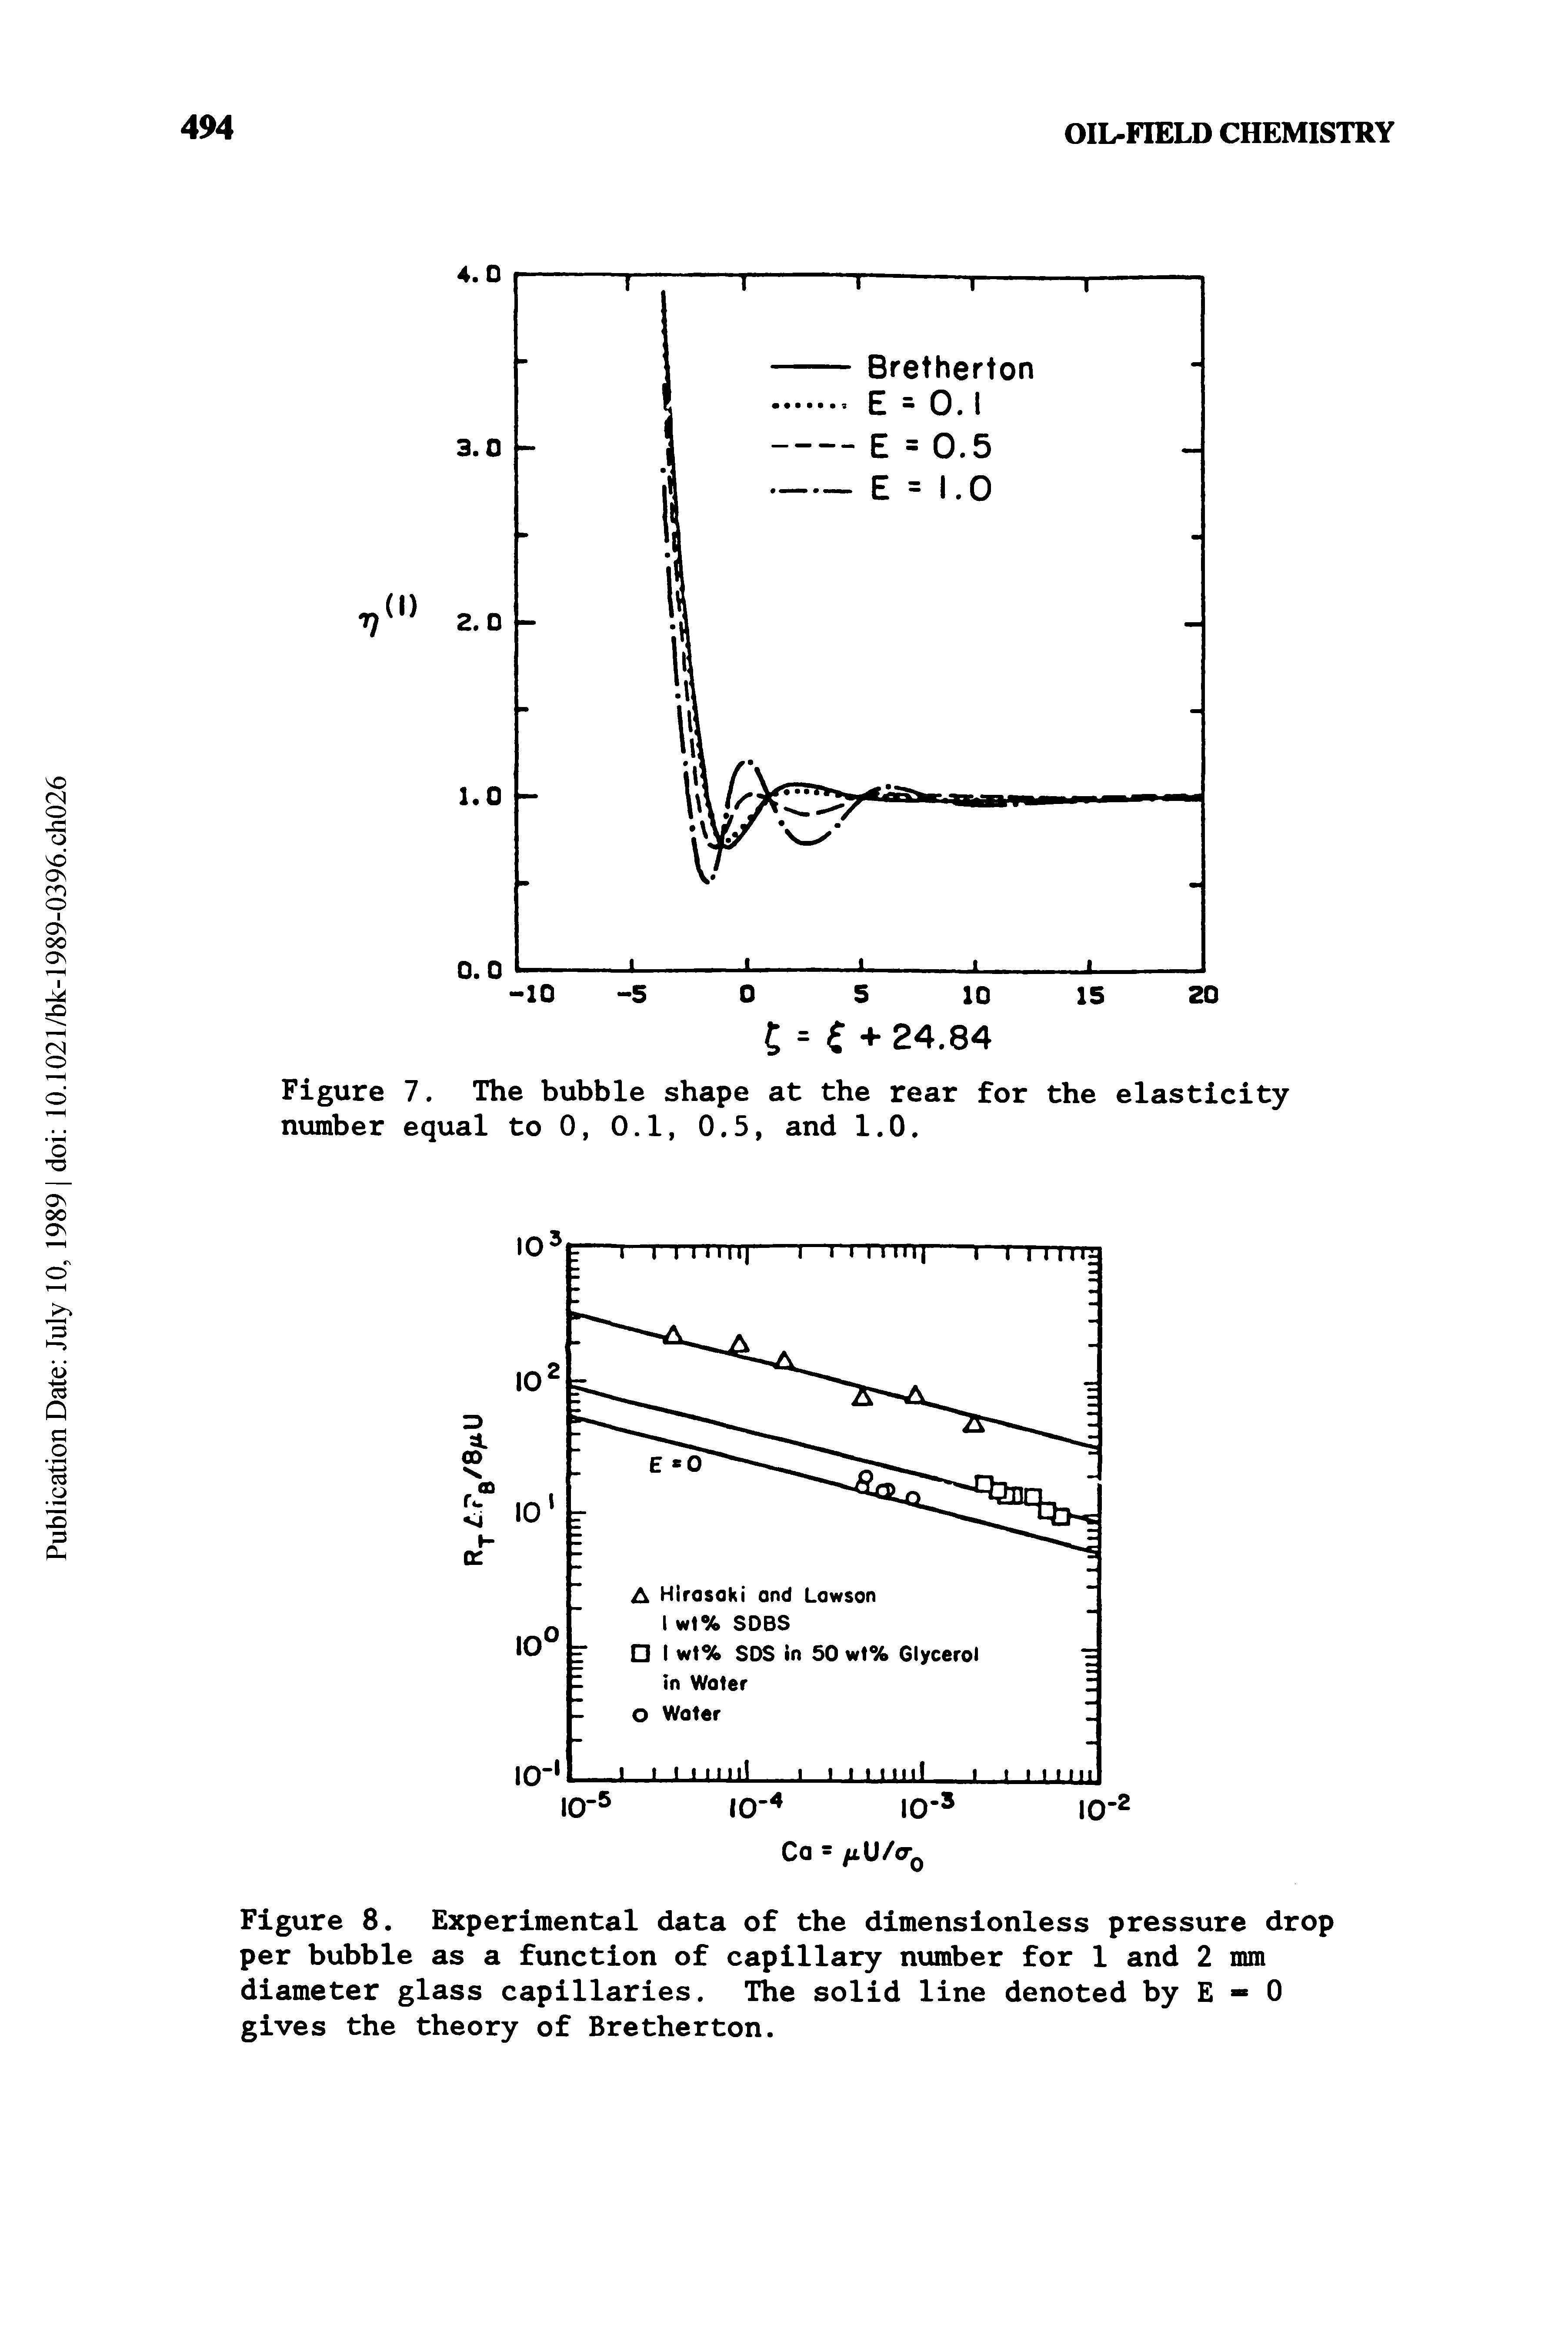 Figure 8. Experimental data of the dimensionless pressure drop per bubble as a function of capillary number for 1 and 2 mm diameter glass capillaries. The solid line denoted by E - 0 gives the theory of Bretherton.